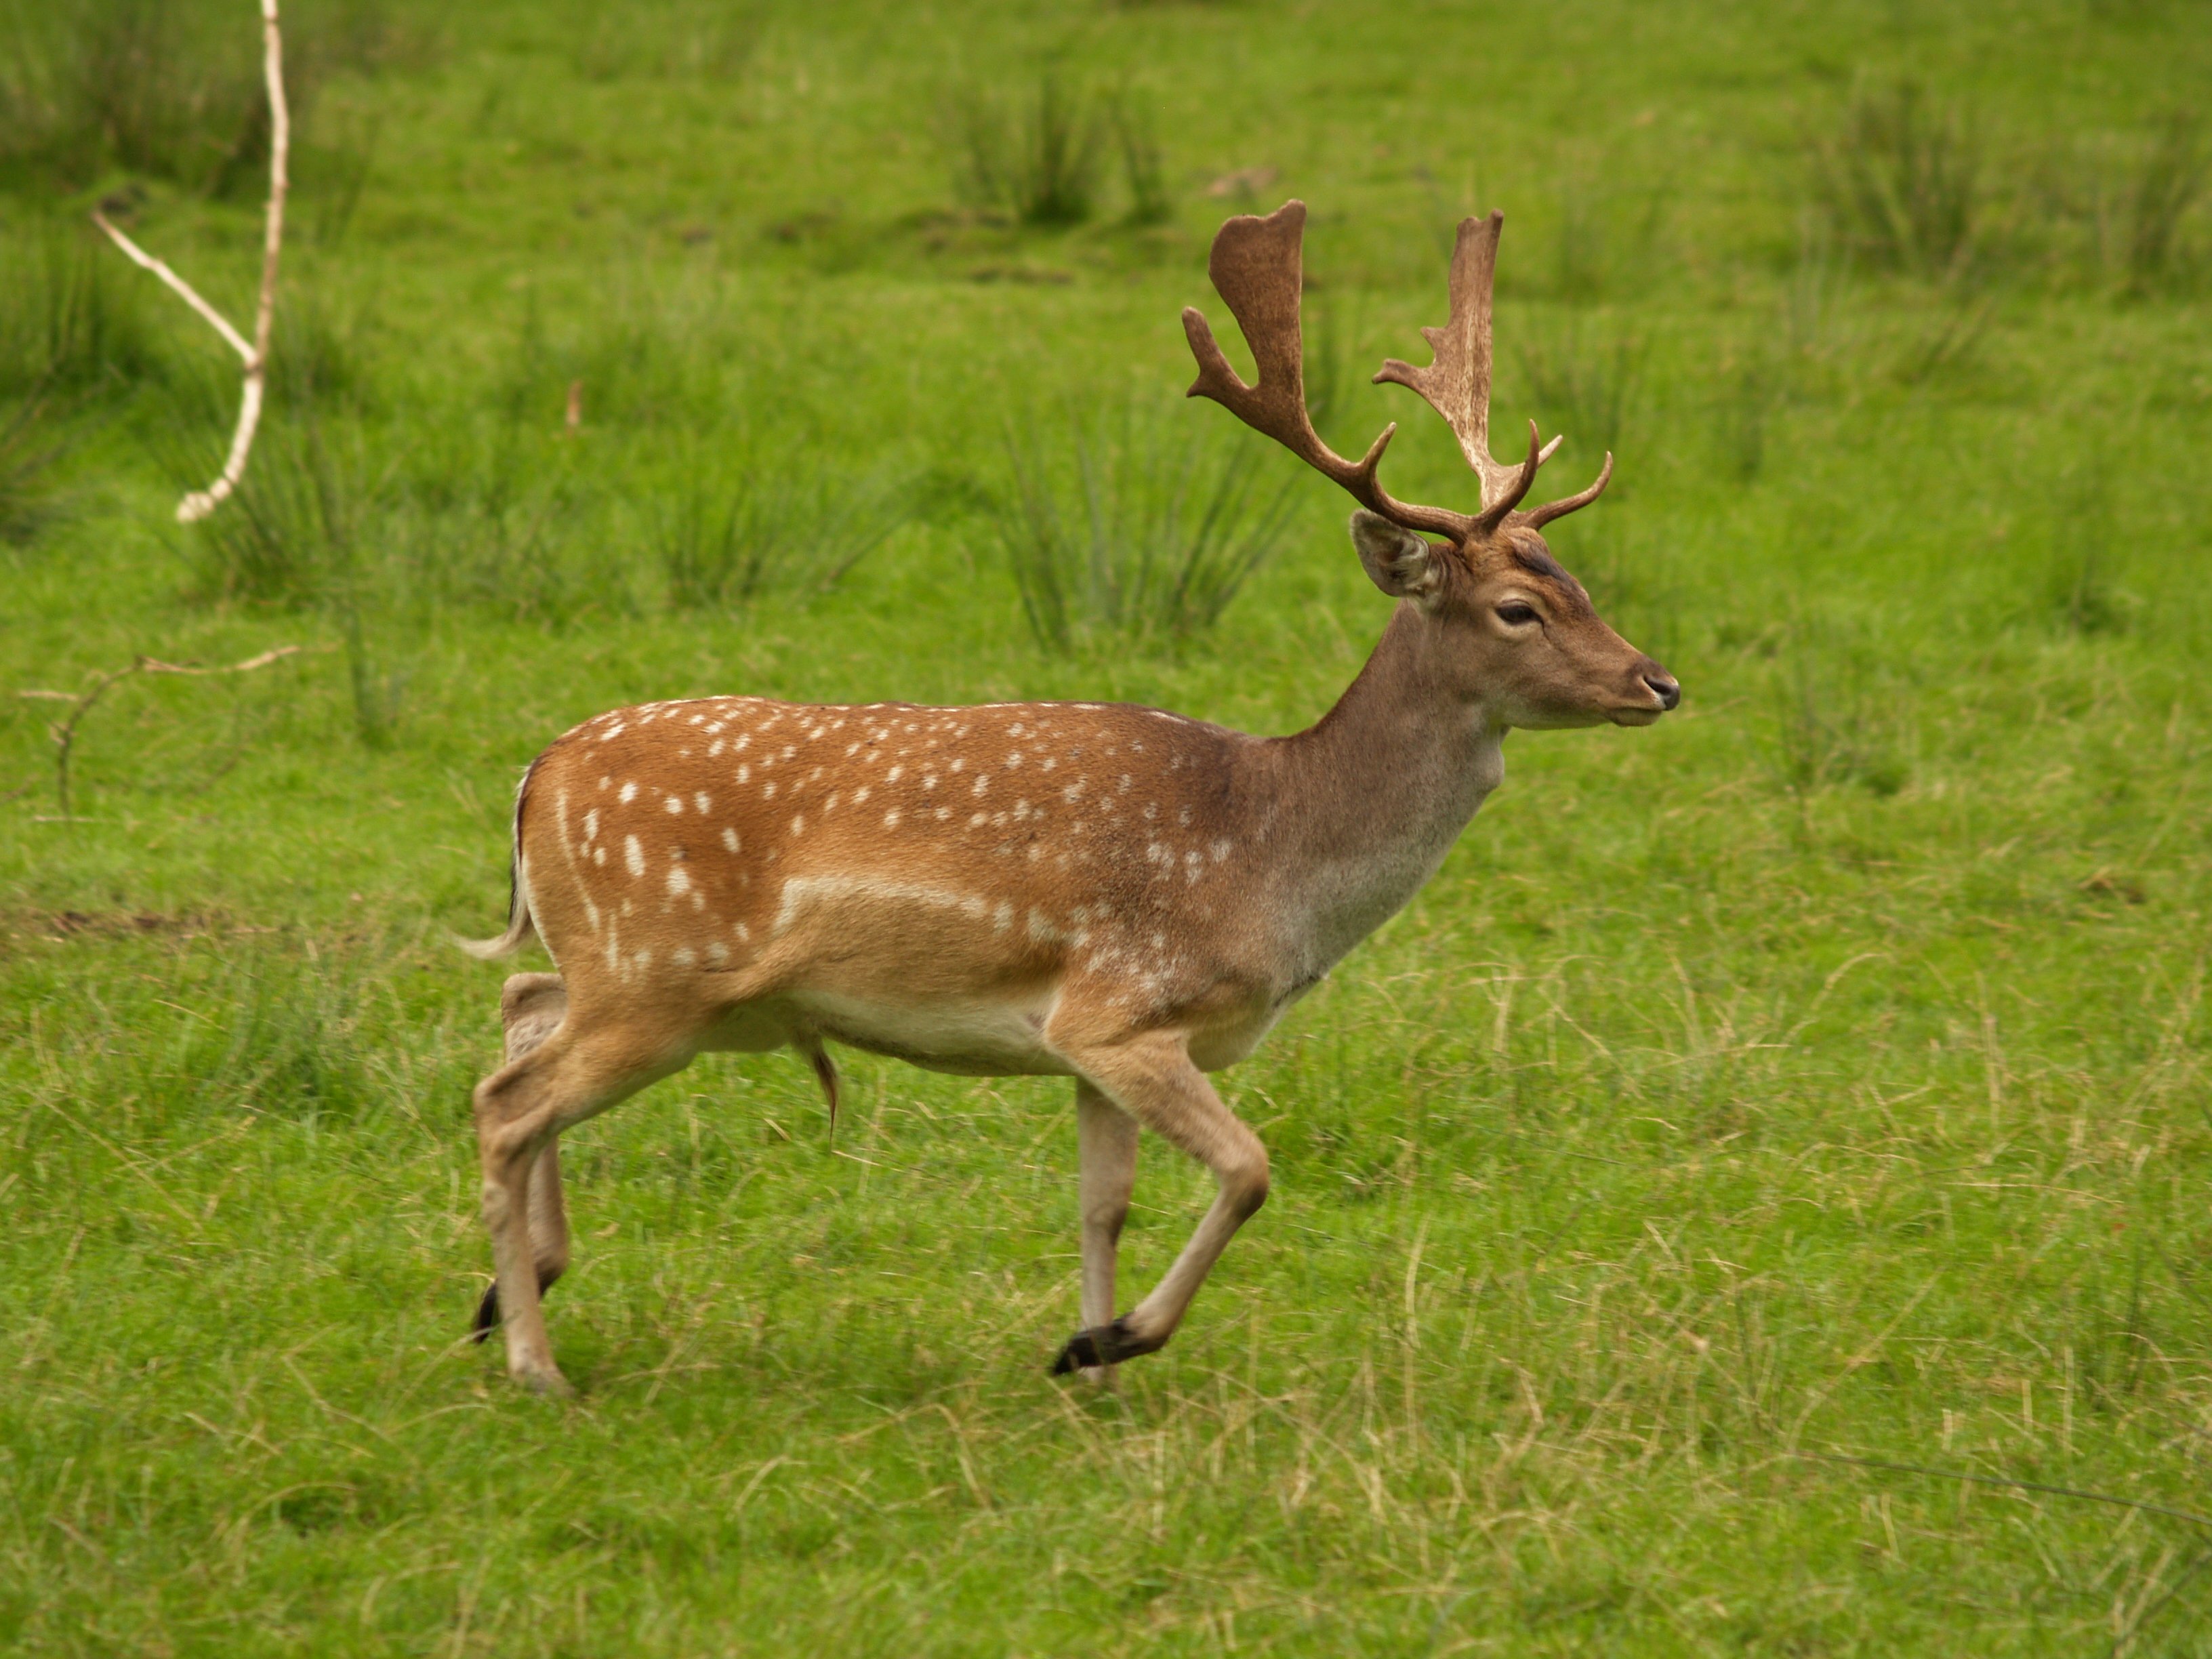 What are deer called when they become adults?